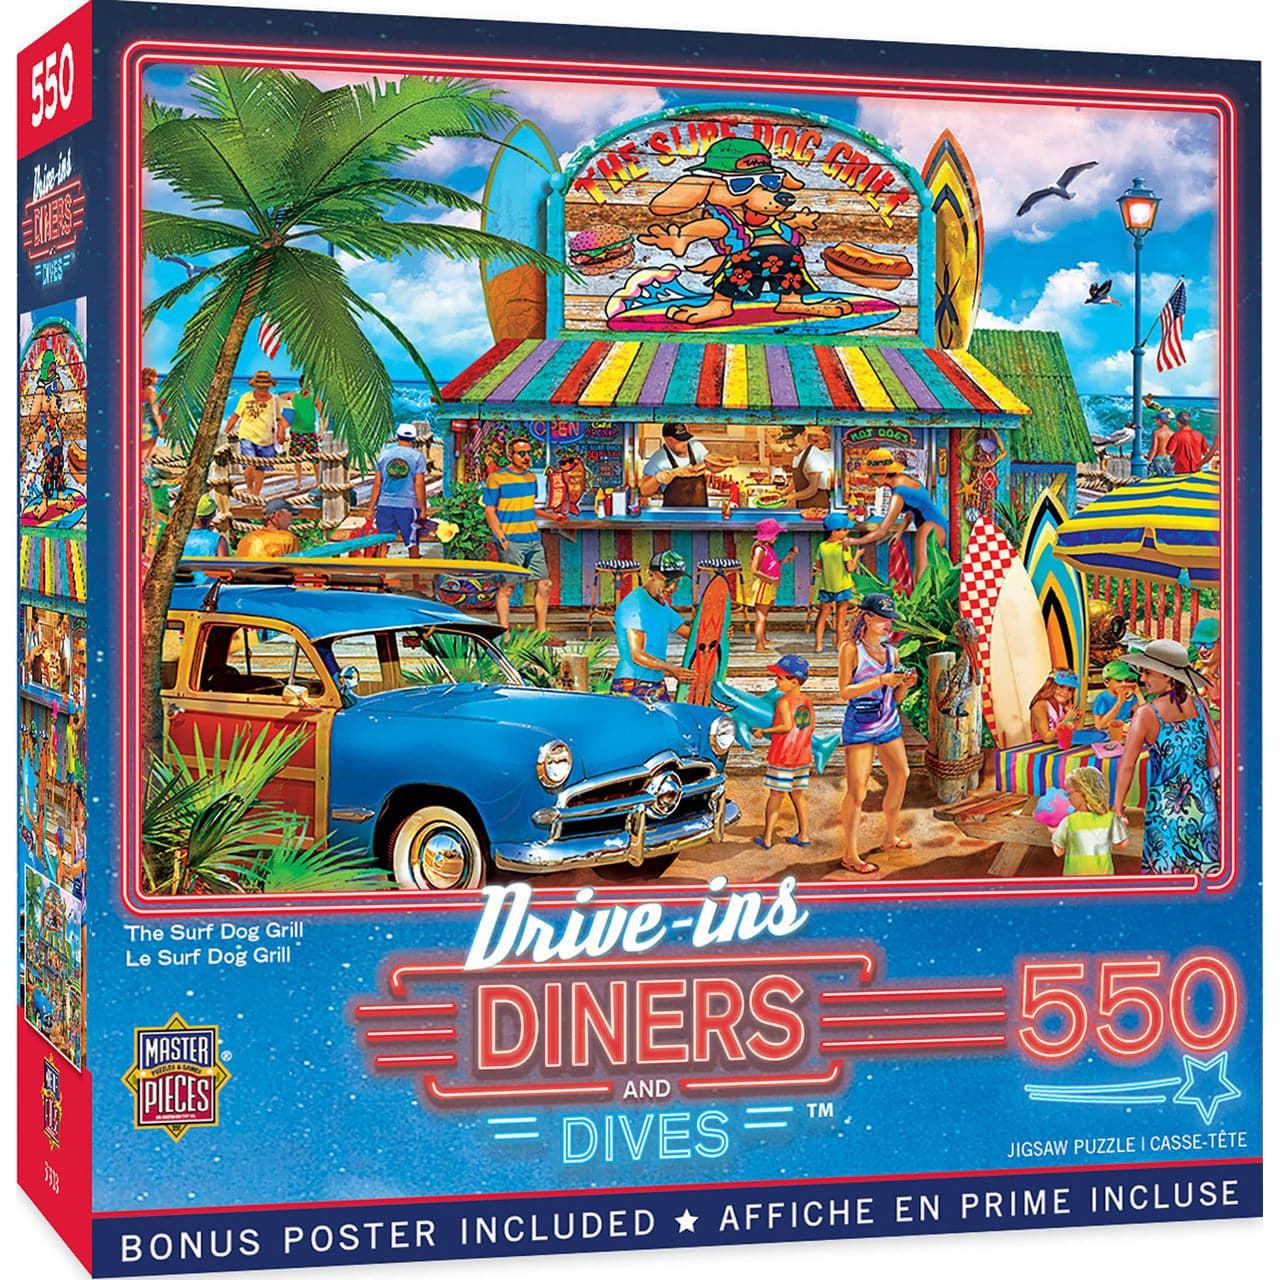 MasterPieces-Drive-Ins, Diners, and Dives - The Surf Dog Grill - 550 Piece Puzzle-32247-Legacy Toys